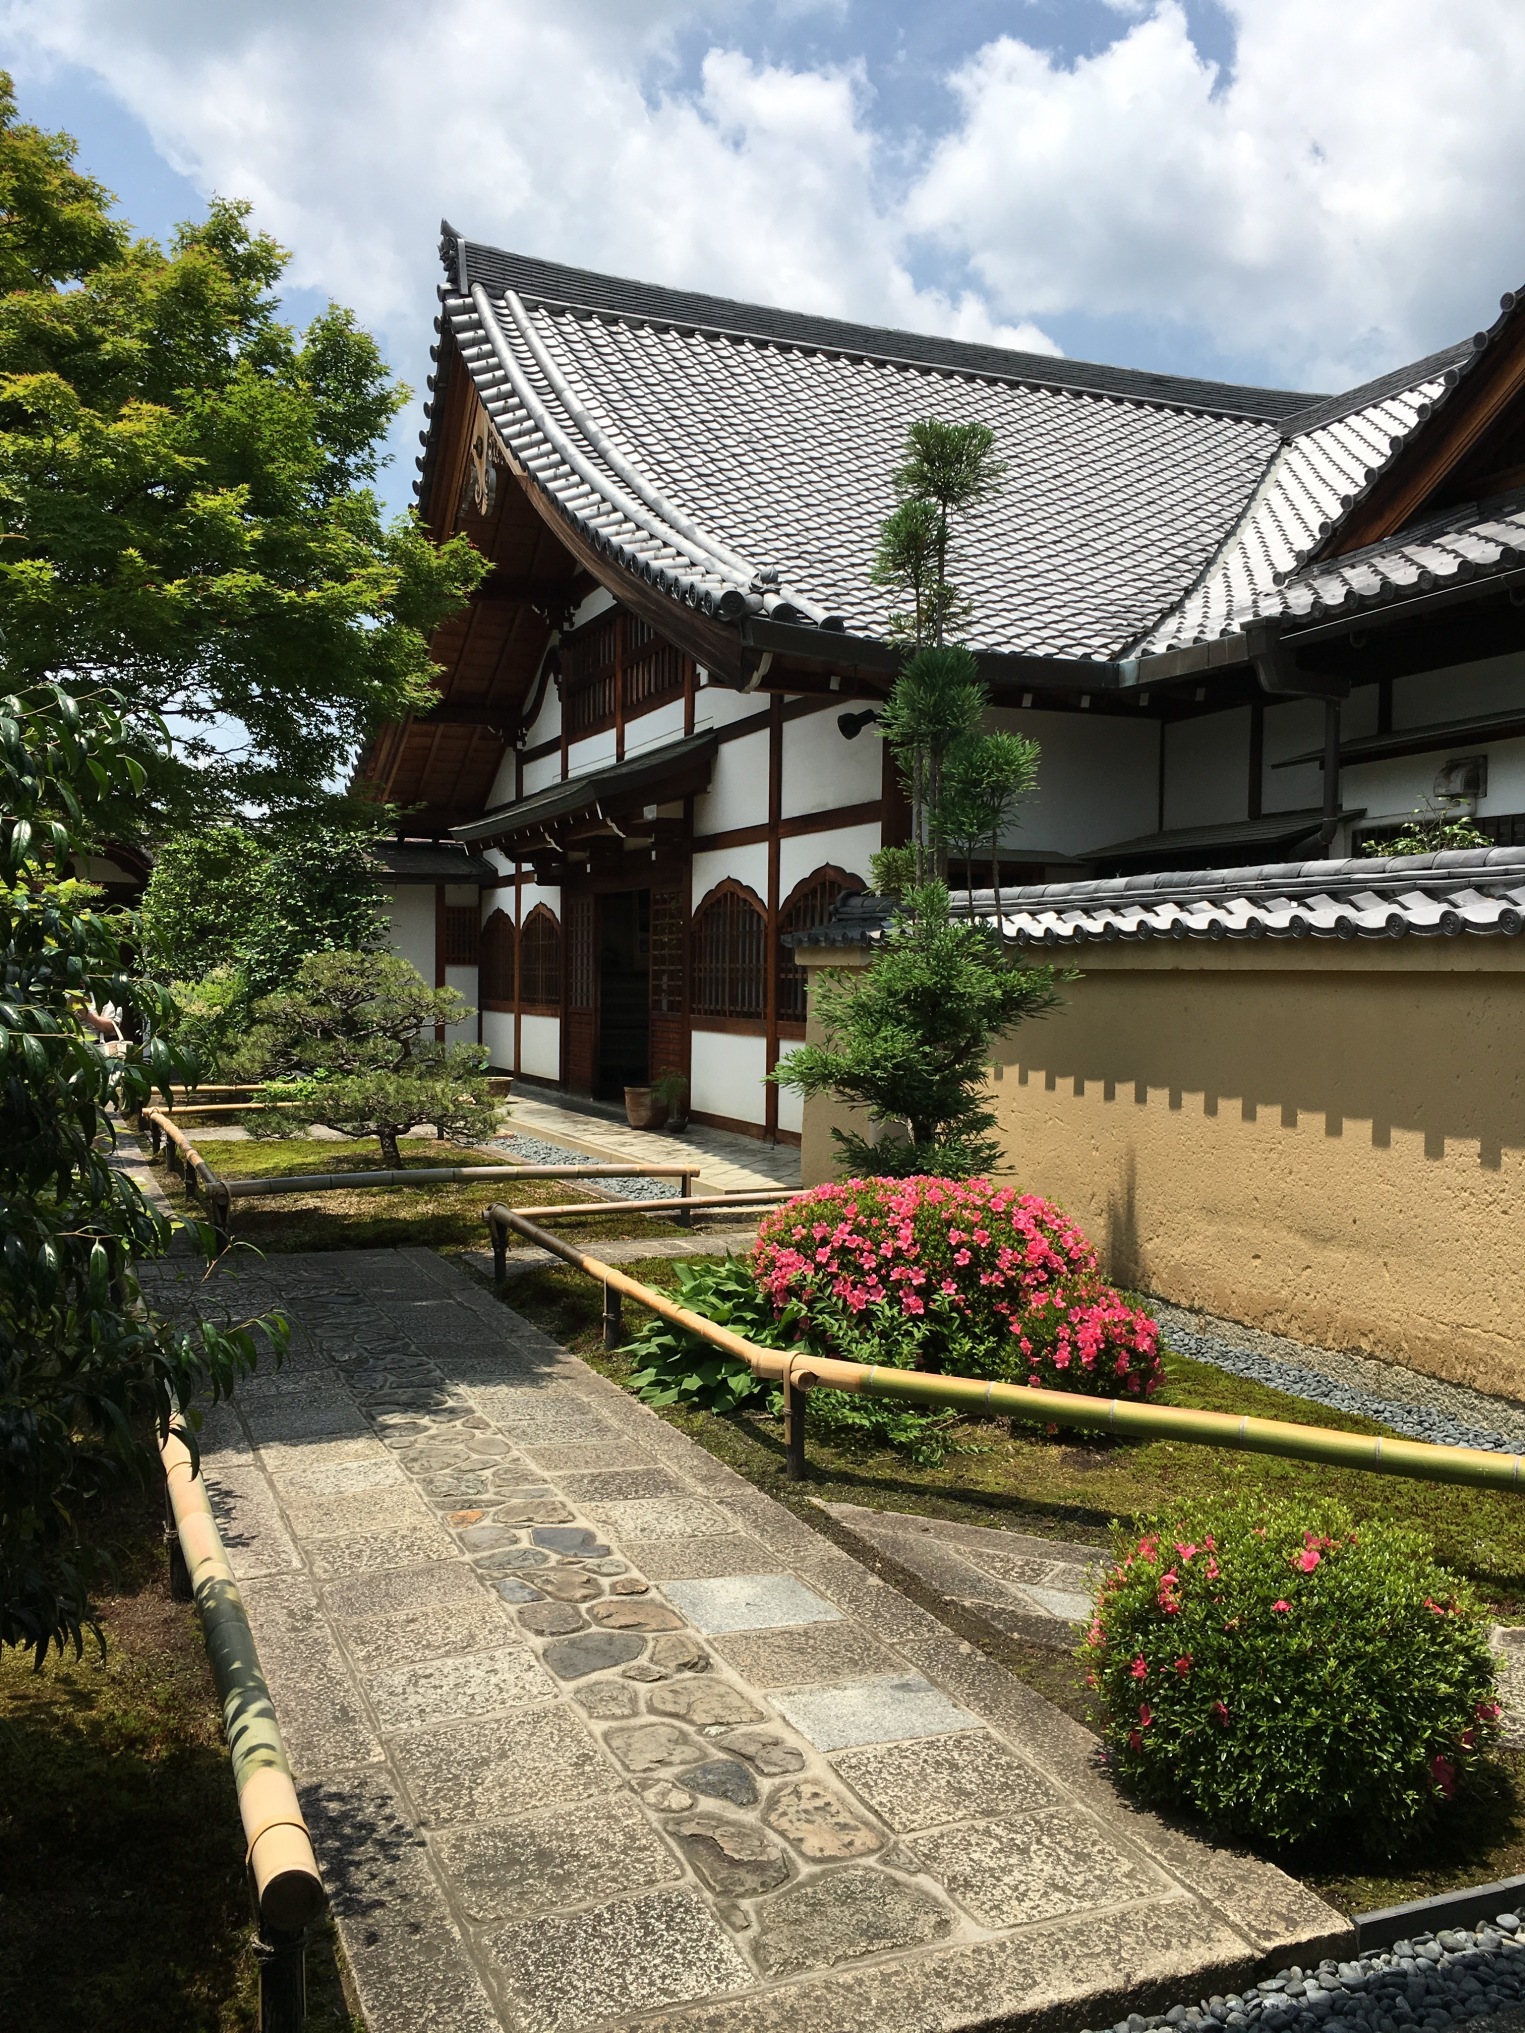 Korin-in Temple, Daitoku-ji. The sounds associated with the Zen Buddhist ceremony that we heard while viewing the garden in the Temple grounds reminded me of th e importance of sound and the other senses in elemental Japan.